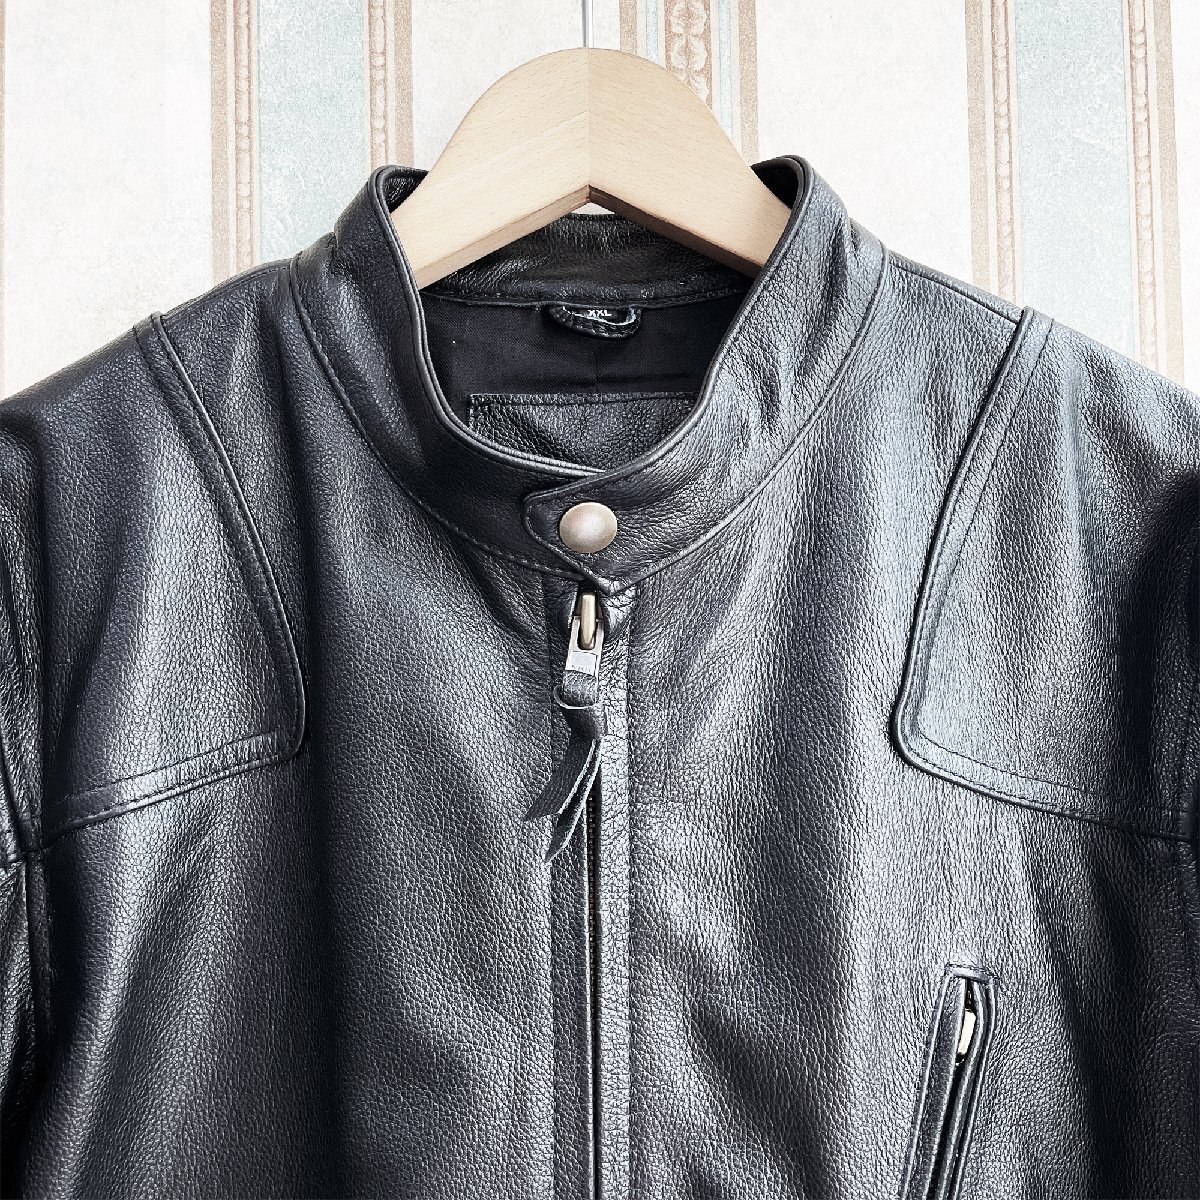  high class regular price 16 ten thousand FRANKLIN MUSK* America * New York departure leather jacket fine quality cow leather -ply thickness rare Rider's leather jacket motorcycle size 2